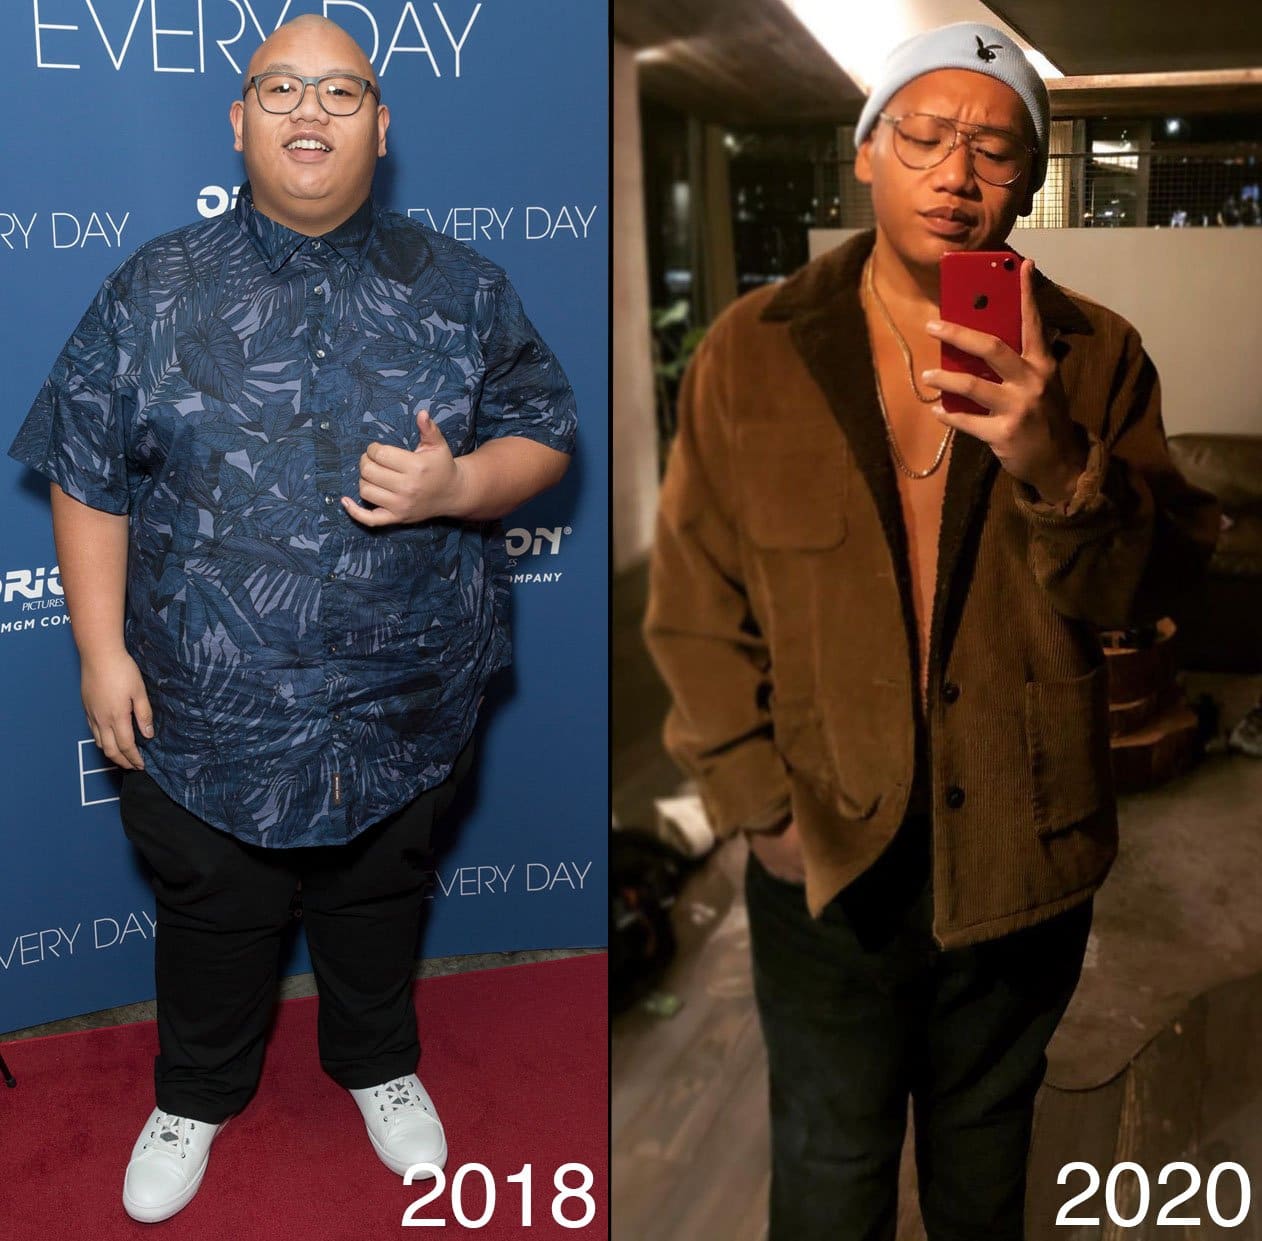 Jacob Batalon focused on his overall health in 2020, resulting in a 112-pound weight loss